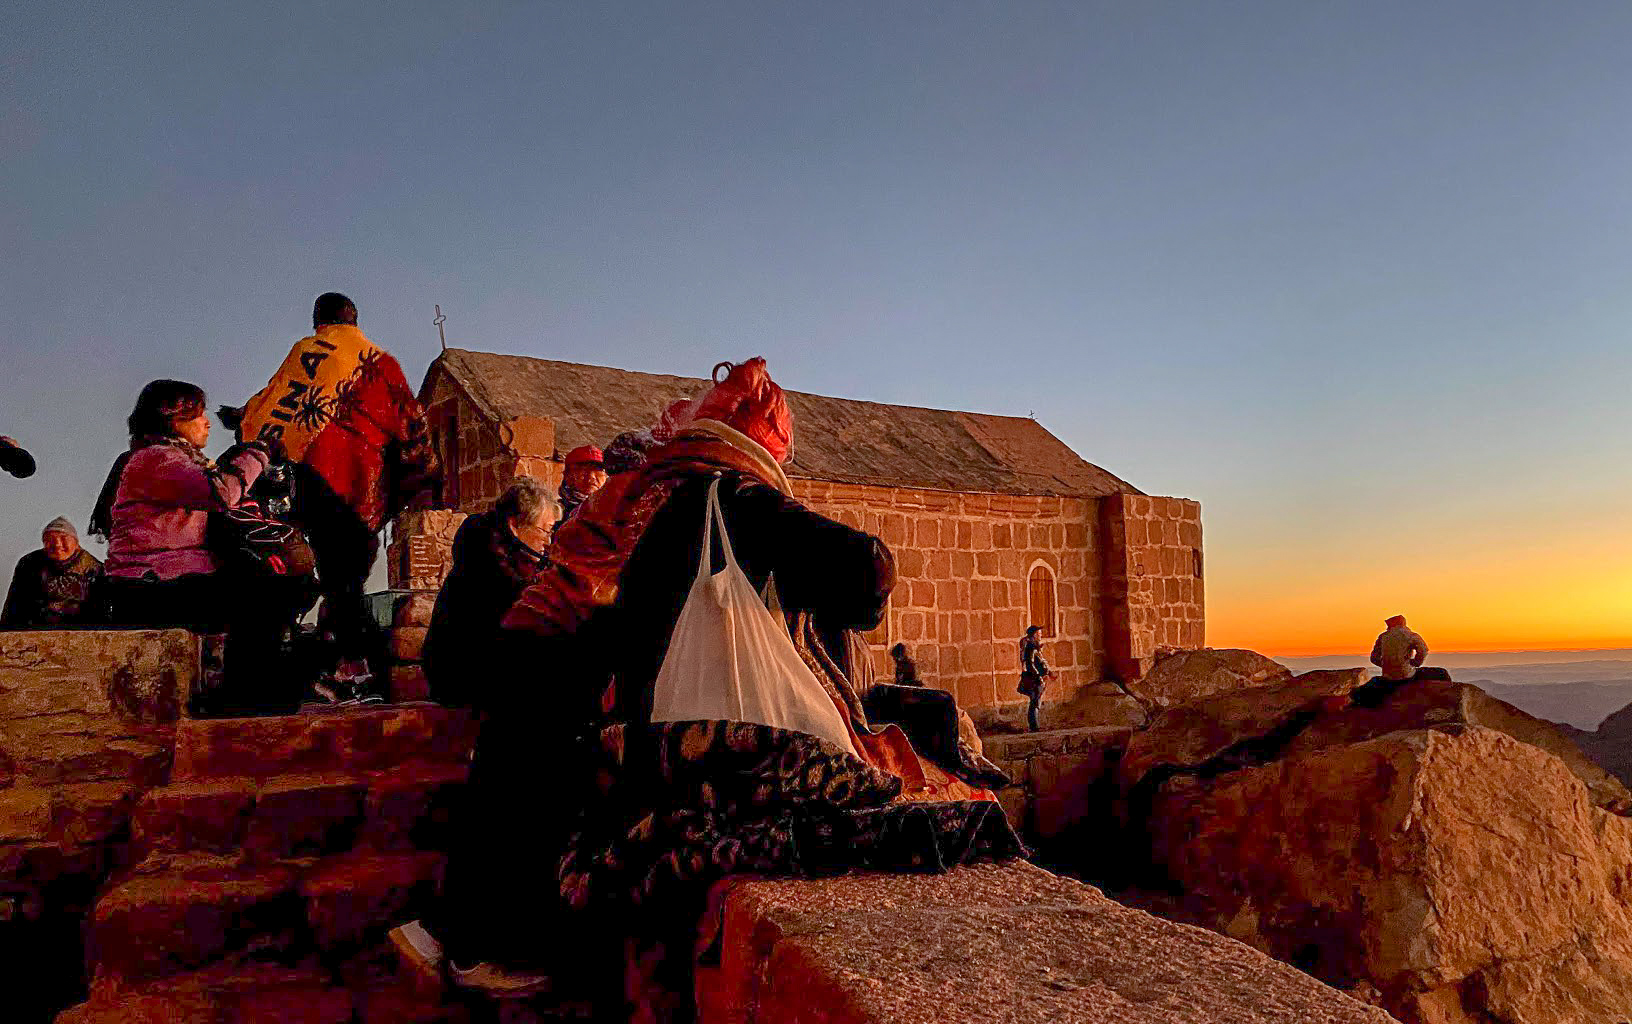 Walkers watching the sunrise from Mount Sinai, Egypt